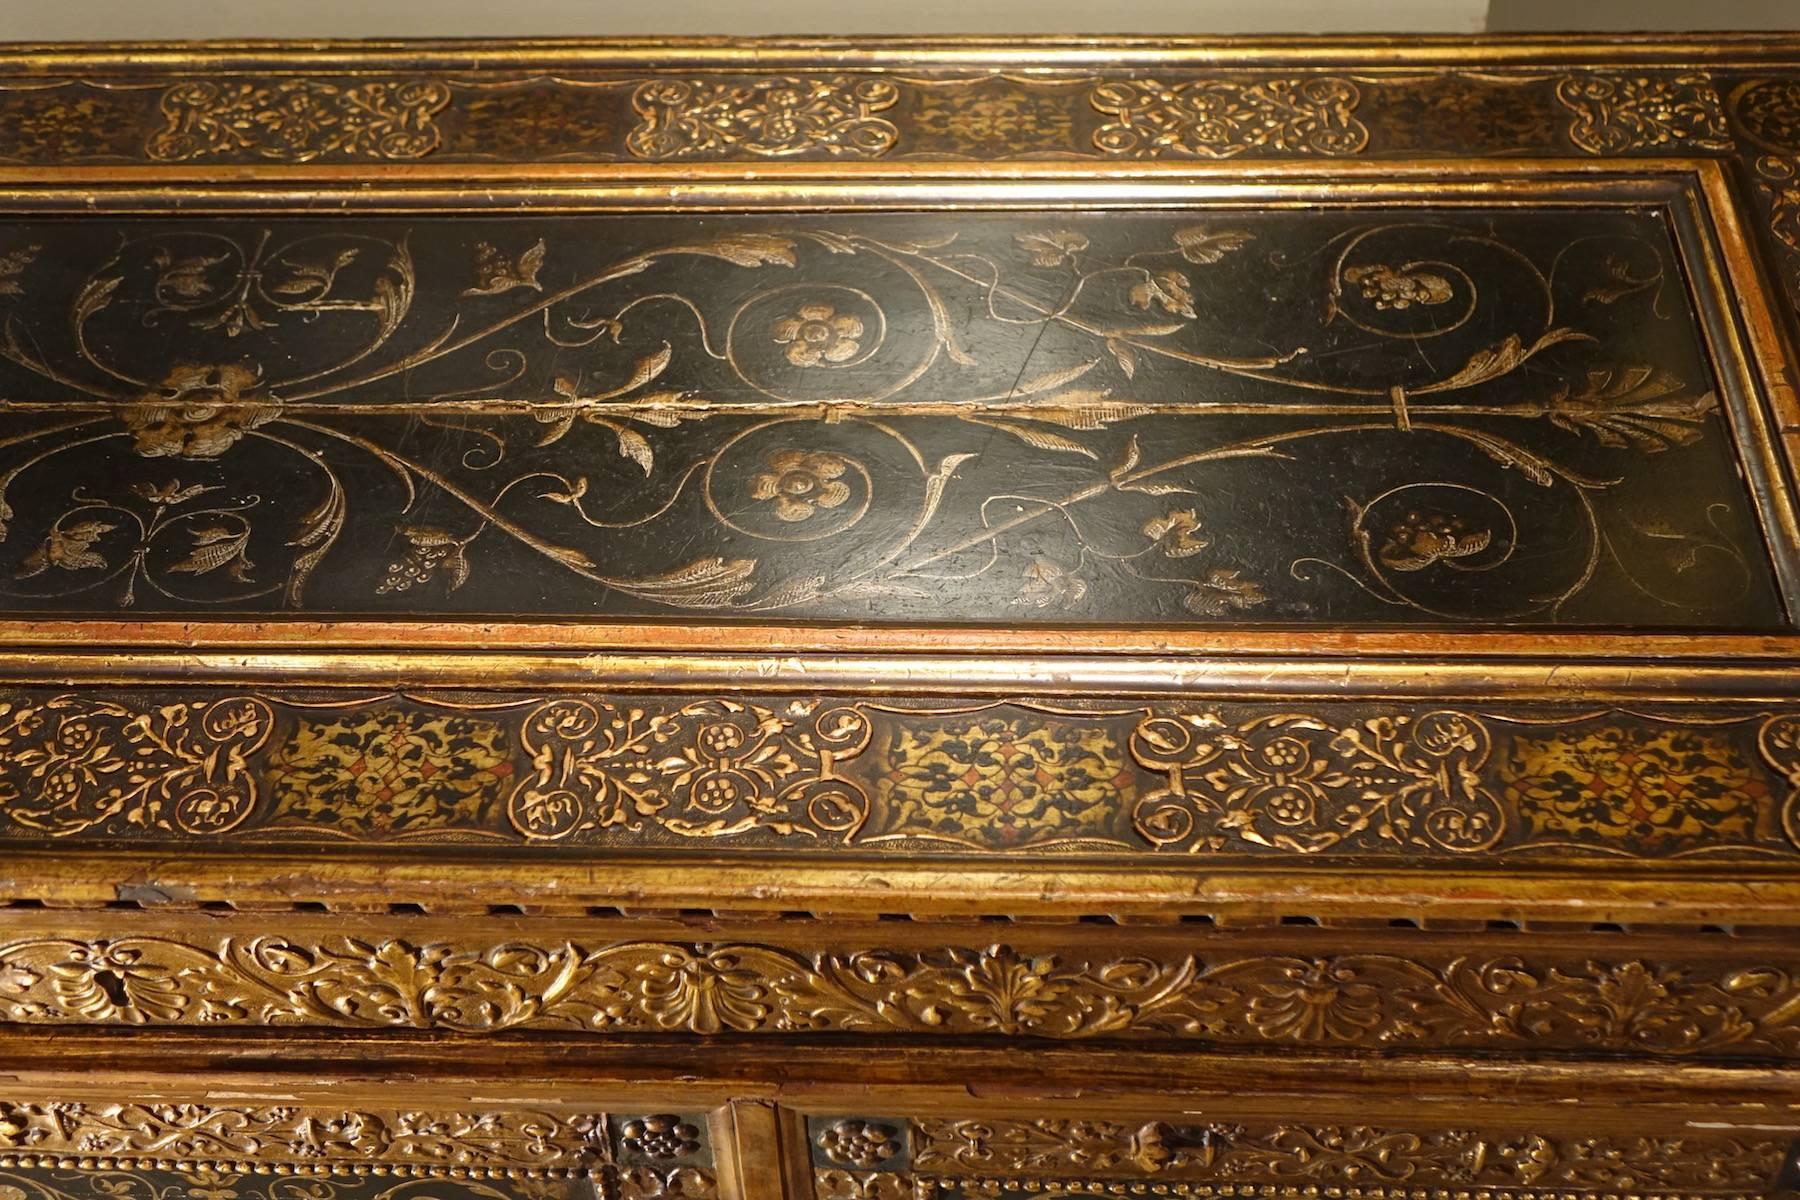 The Cassone is an element of medieval Florentine furniture, used until the artistic Renaissance, where it became a pretext for decorative paintings. In the 1850s, art dealers such as Bardini and Volpi had neo-renaissance coffers made by artists such